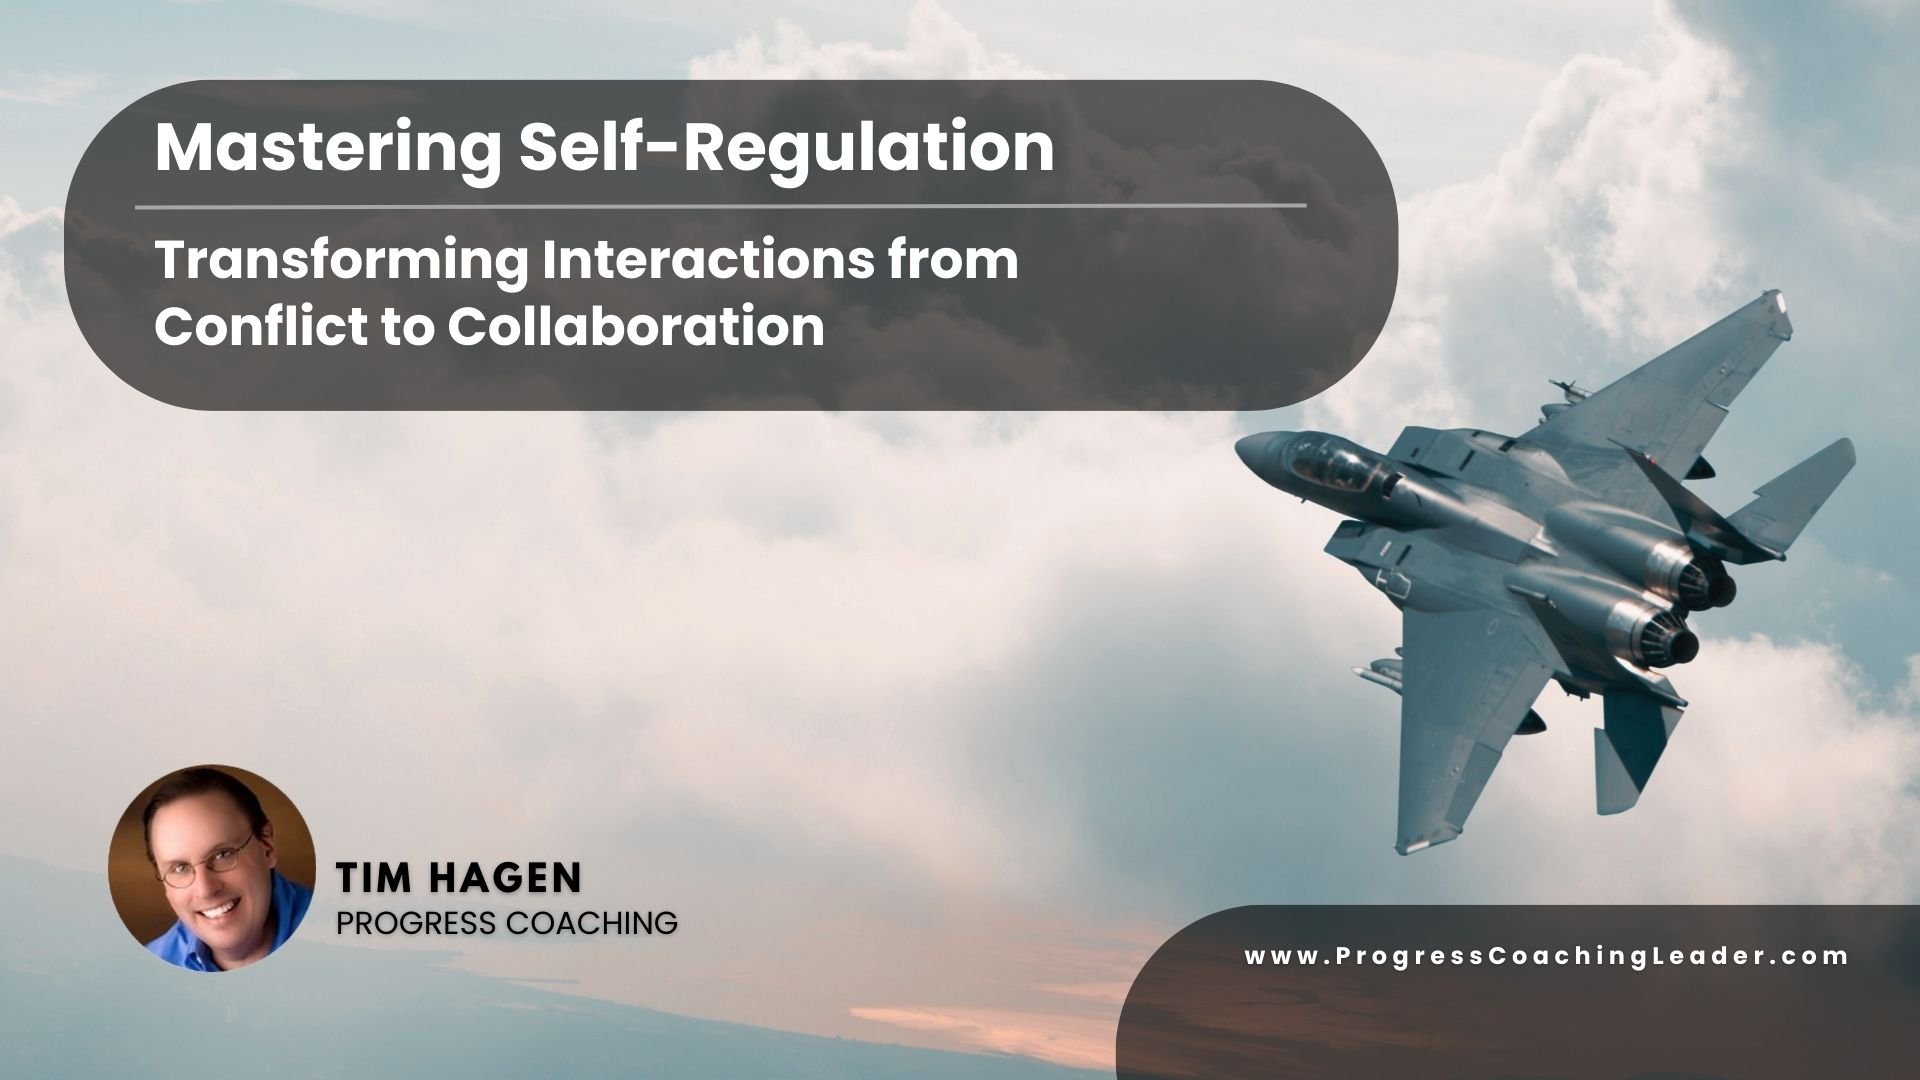 Mastering Self-Regulation: Transforming Interactions from Conflict to Collaboration